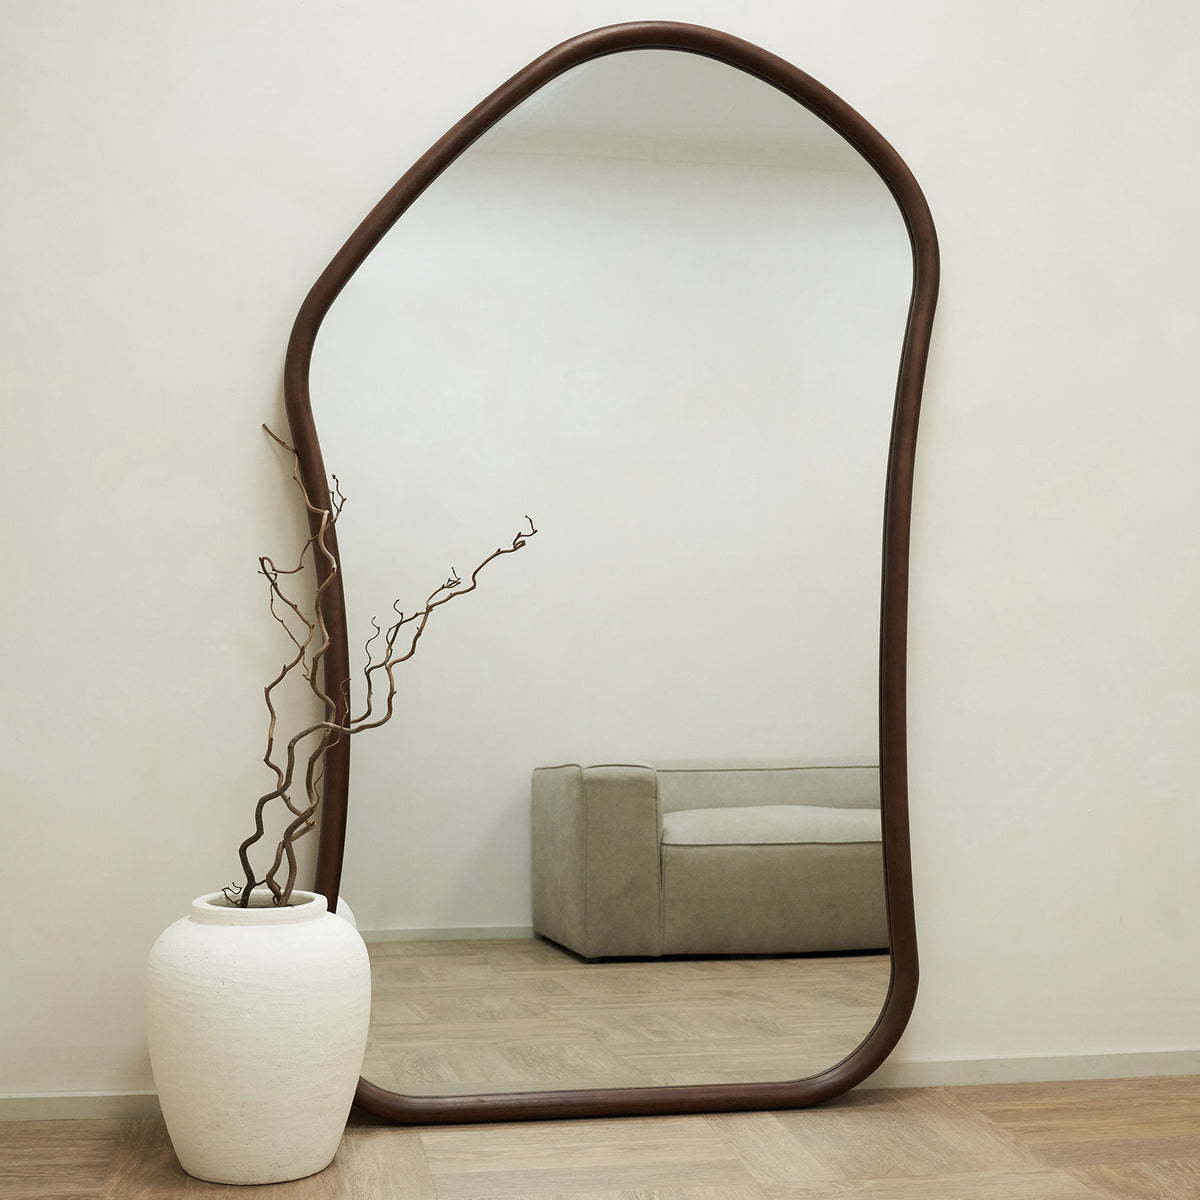 Extra Large Full Length Natural Organic Irregular Wooden Mirror leaning against wall